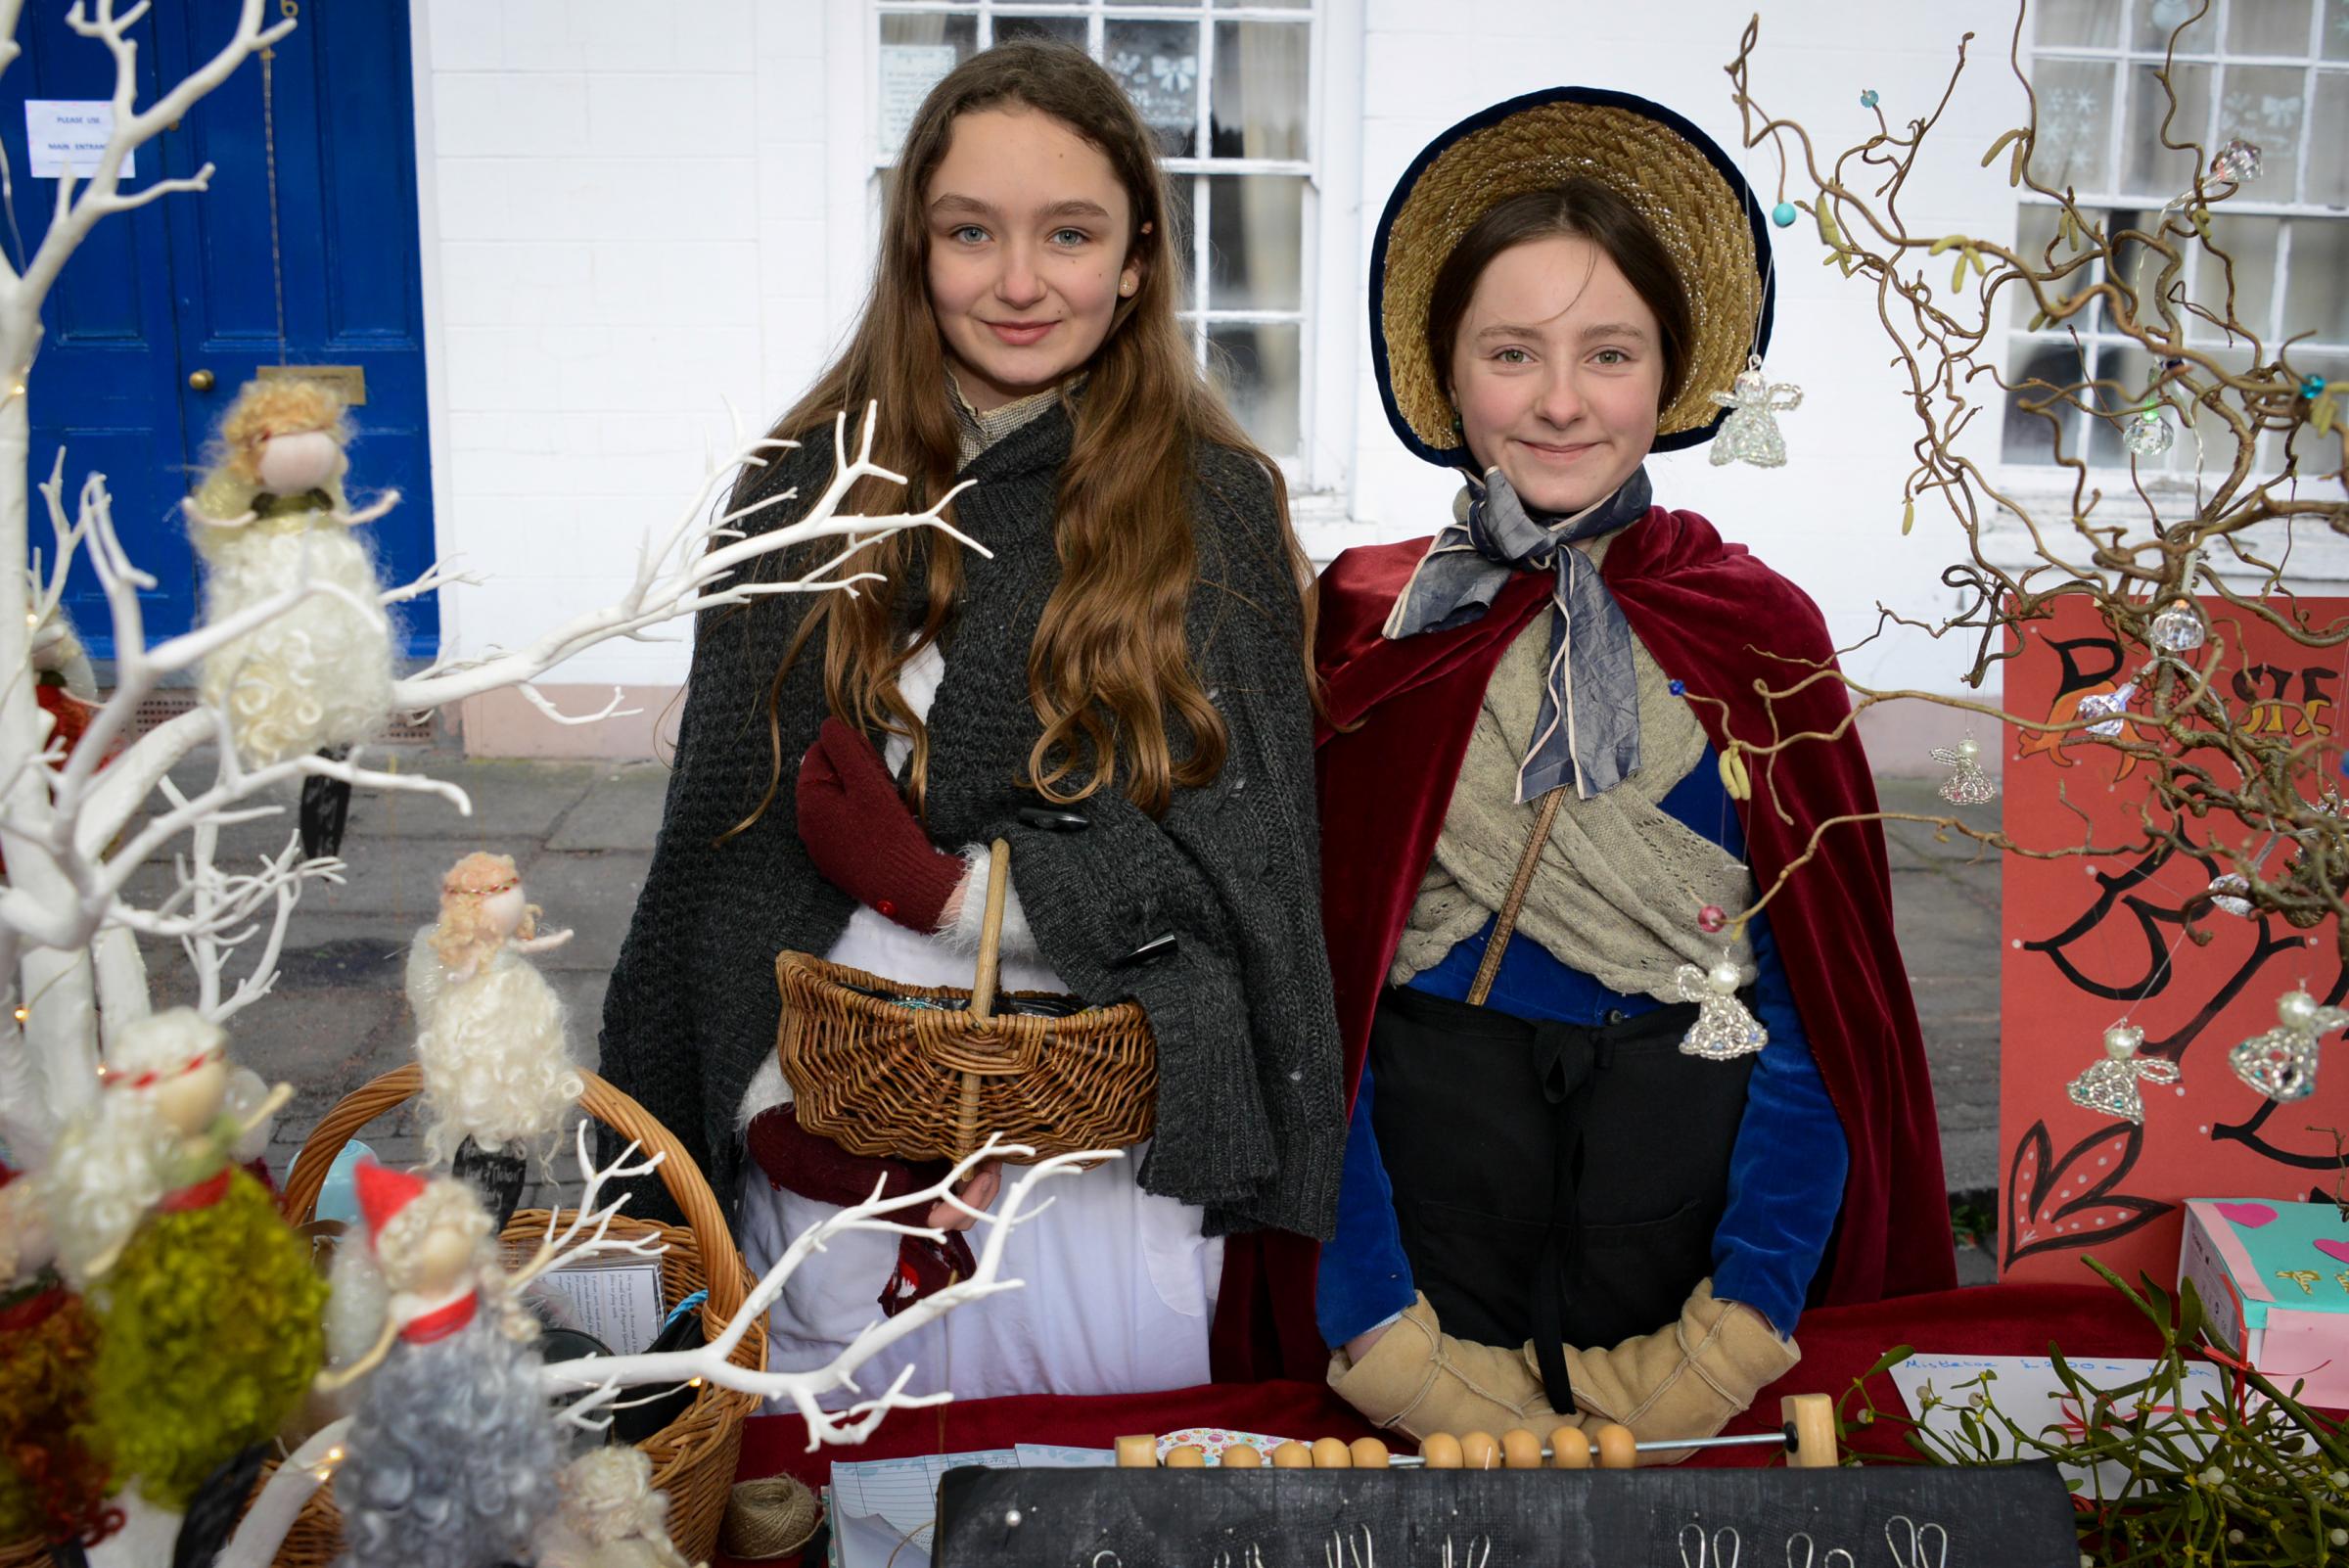 The Victorian market returns later this month